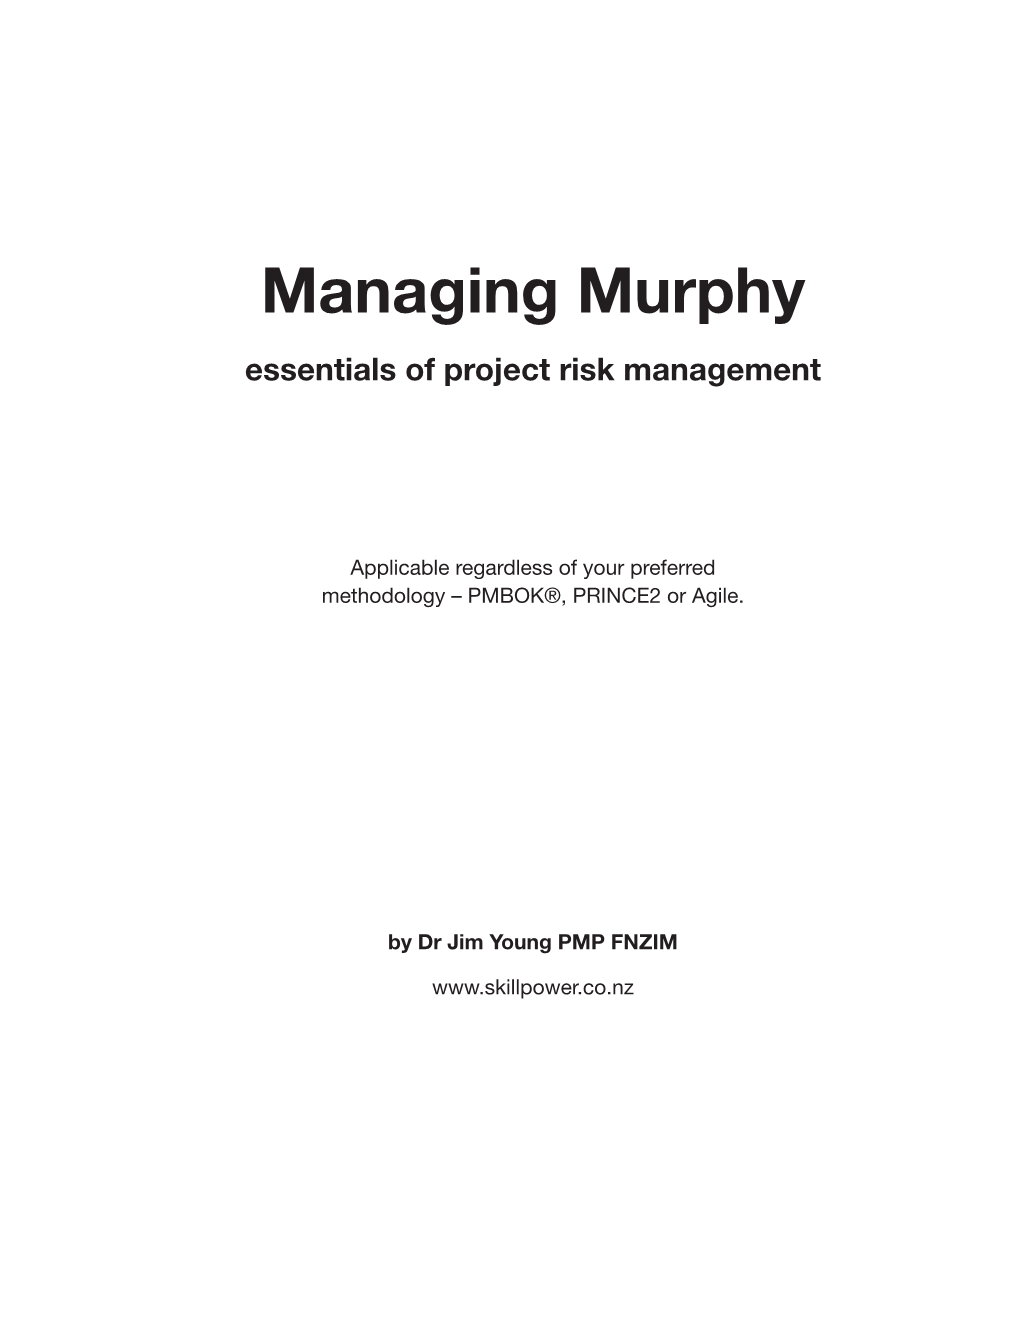 Managing Murphy Essentials of Project Risk Management